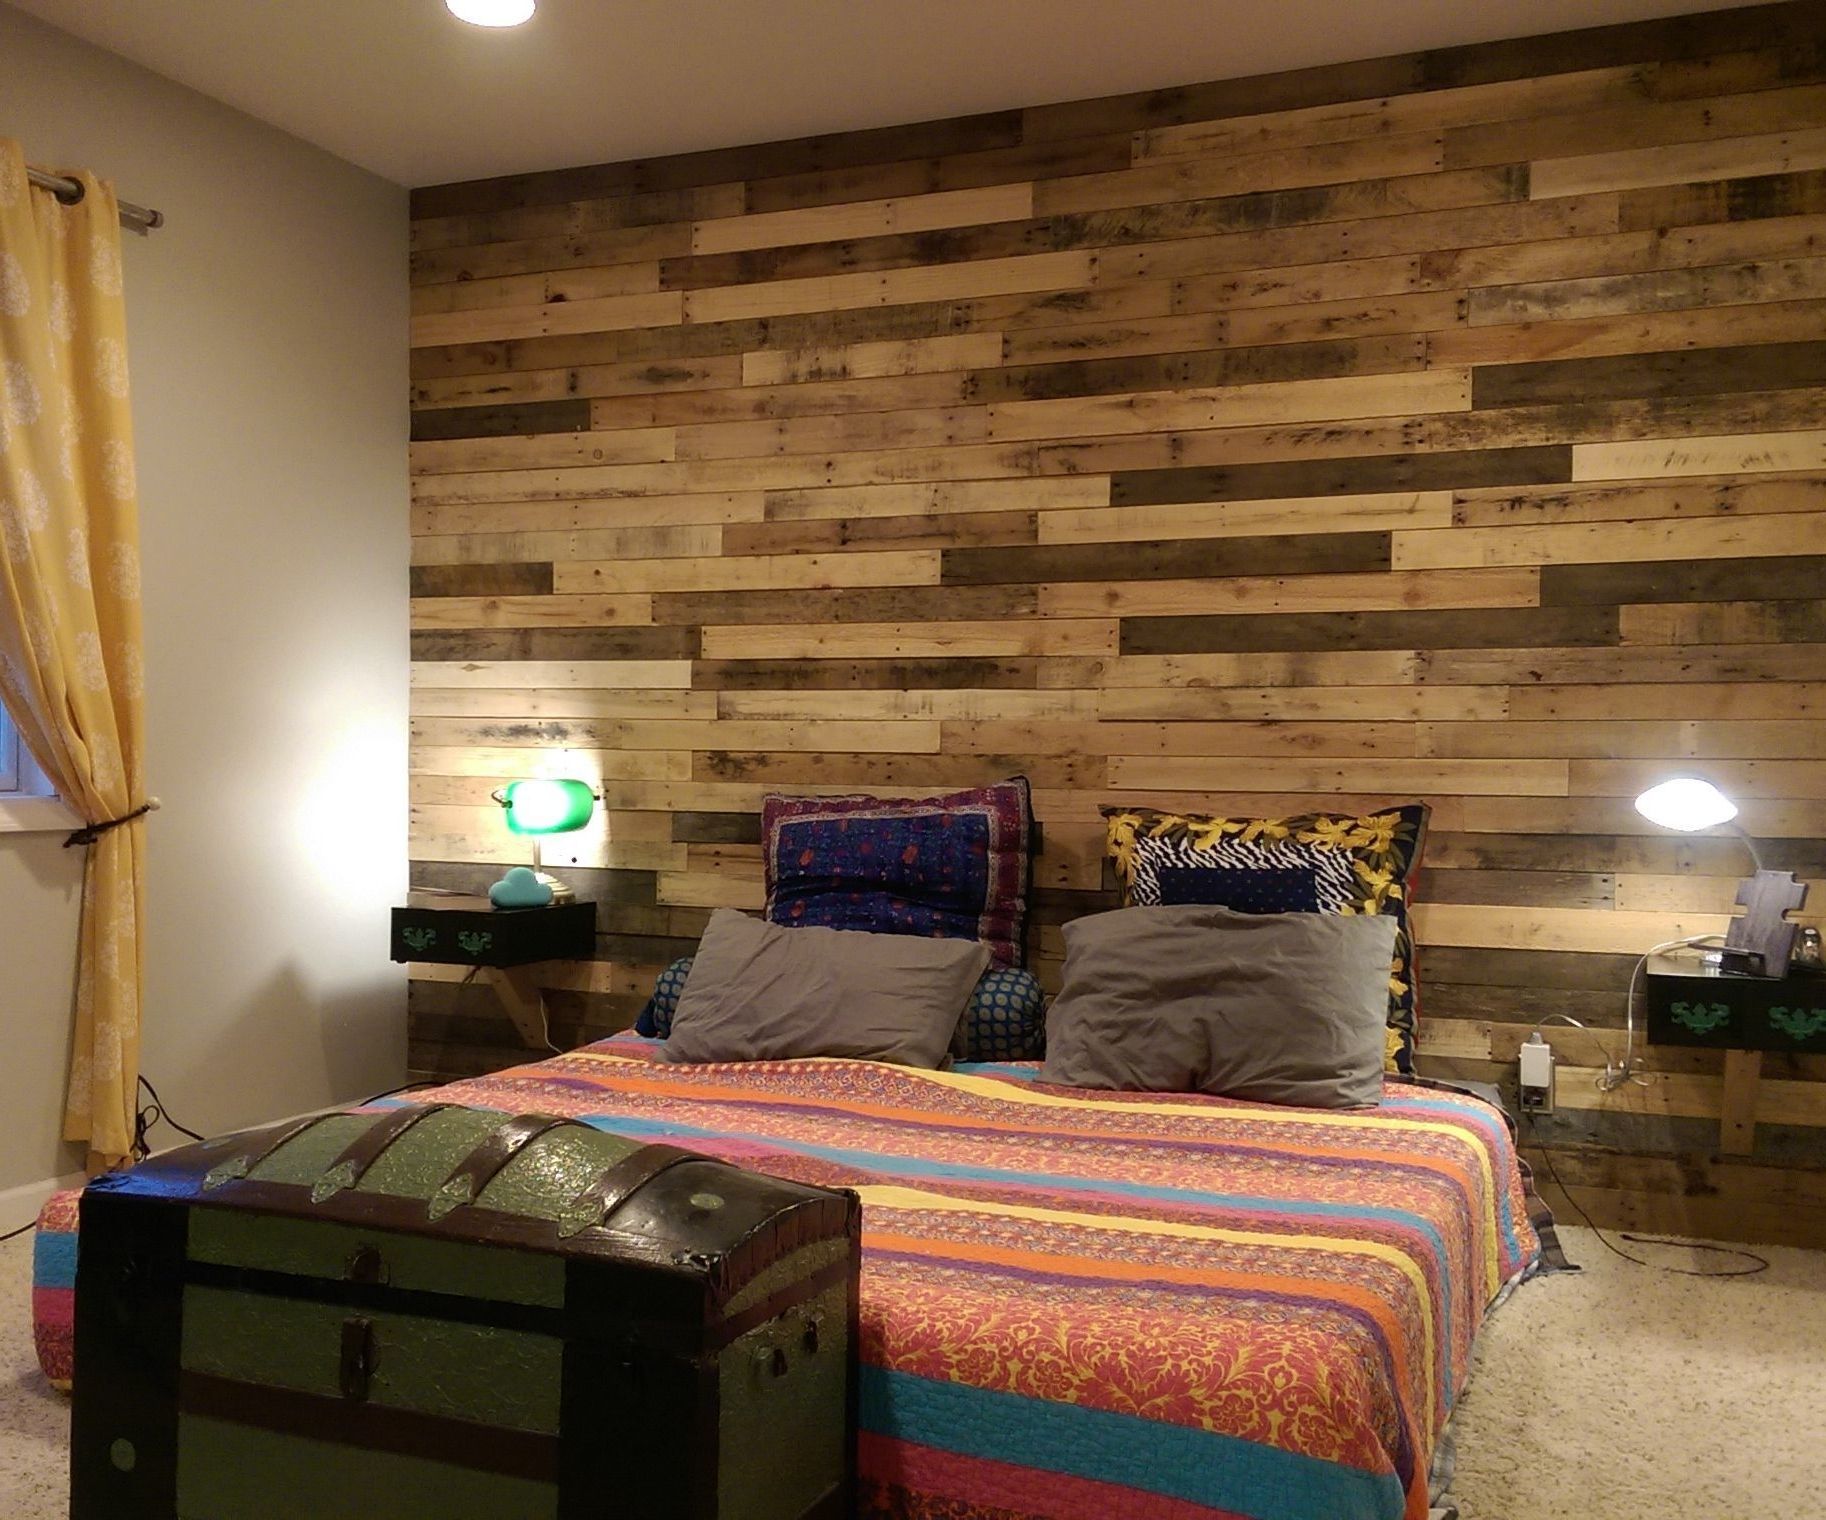 Pallet Accent Wall: 4 Steps (with Pictures) Within Most Current Wall Accents With Pallets (View 1 of 15)